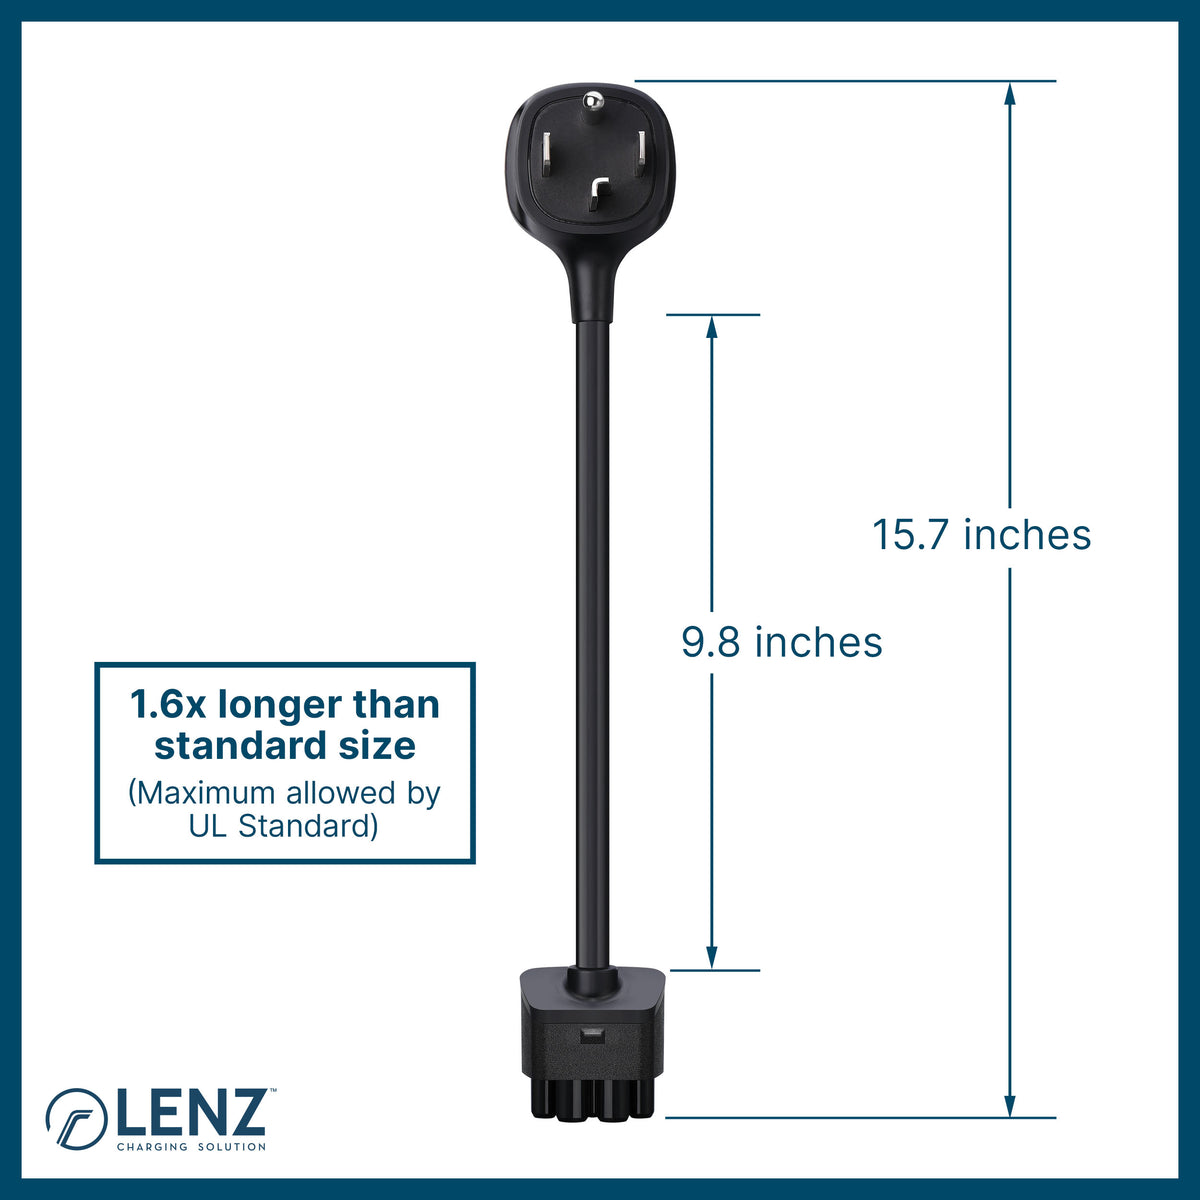 LENZ NEMA 14-30 Adapter for Tesla Gen 2 Mobile Connector Measures 15.7 inches end-to-end